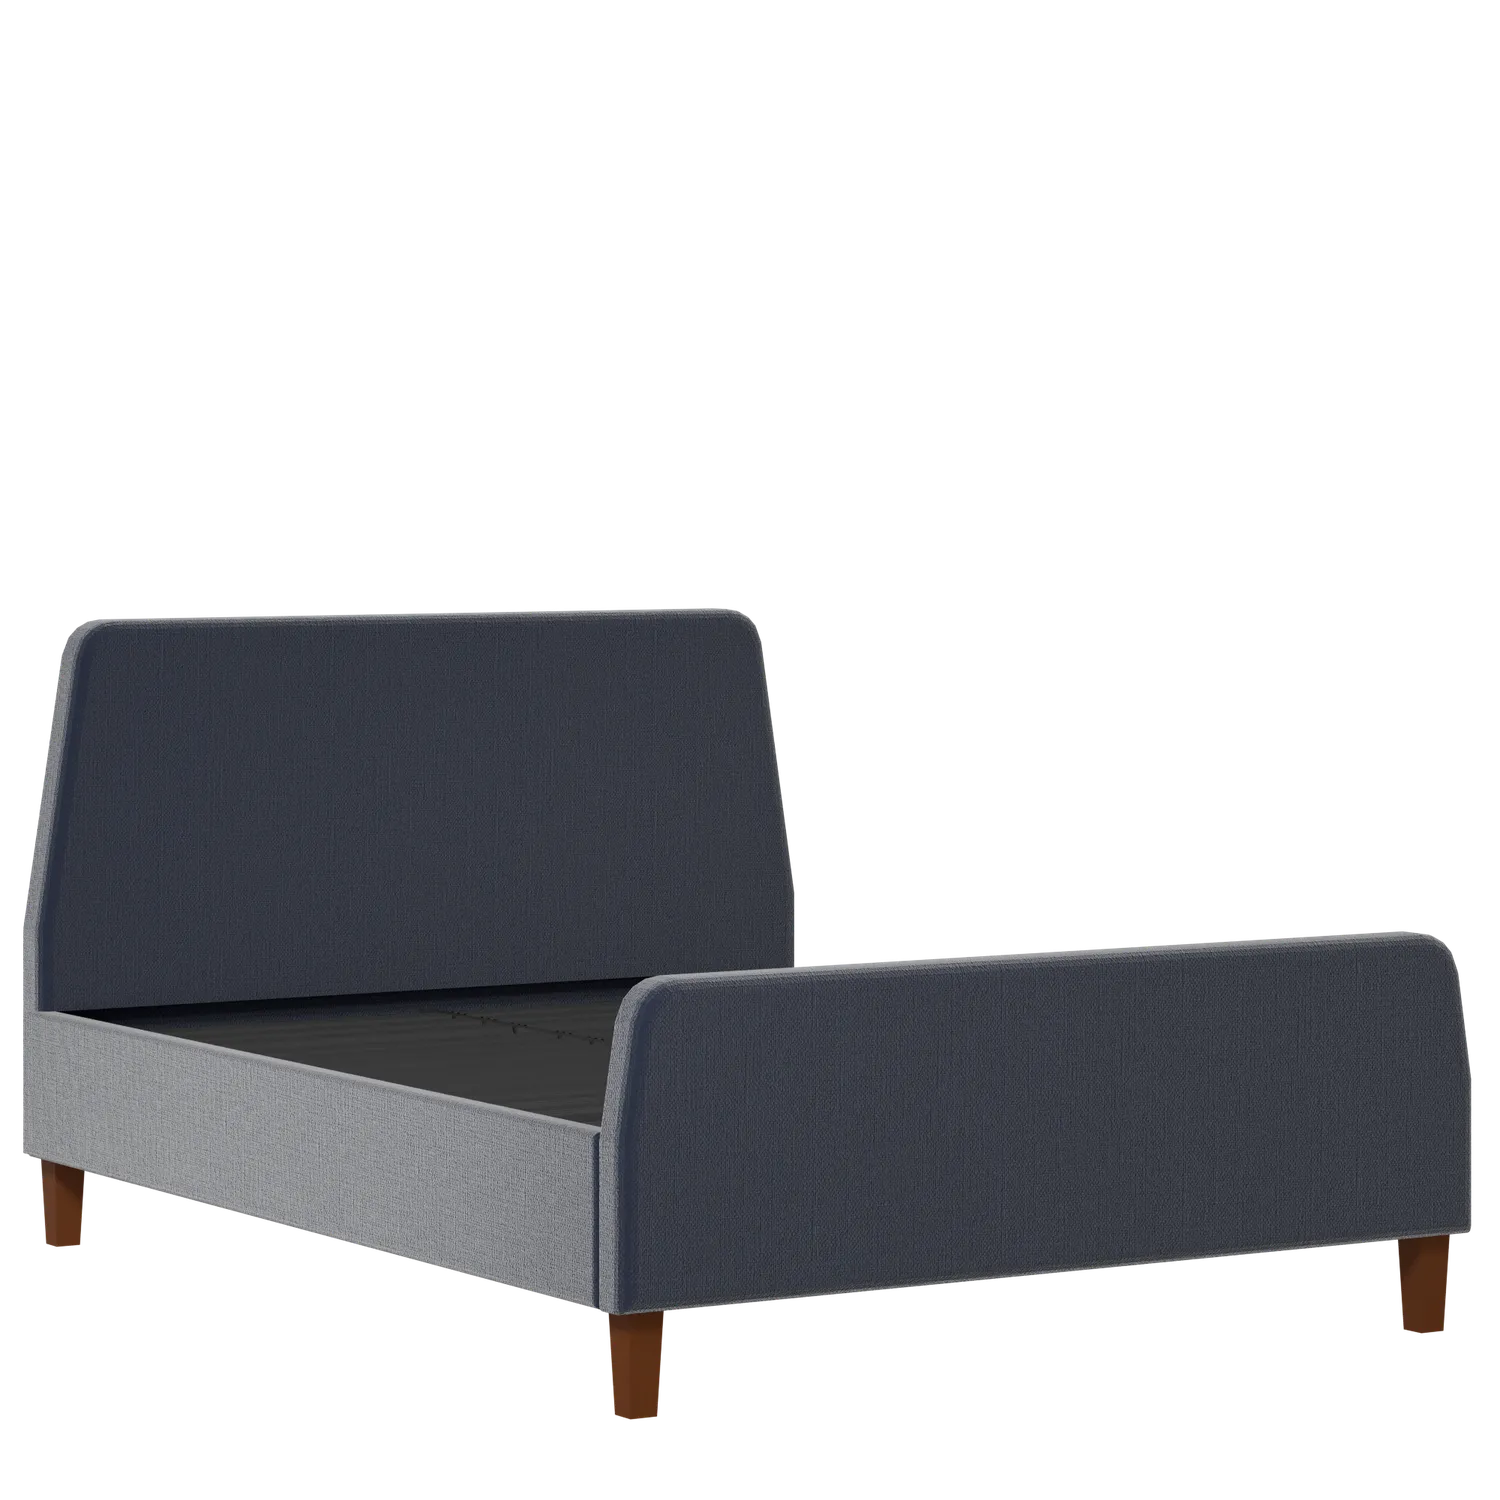 Hanwell upholstered bed in oxford blue fabric